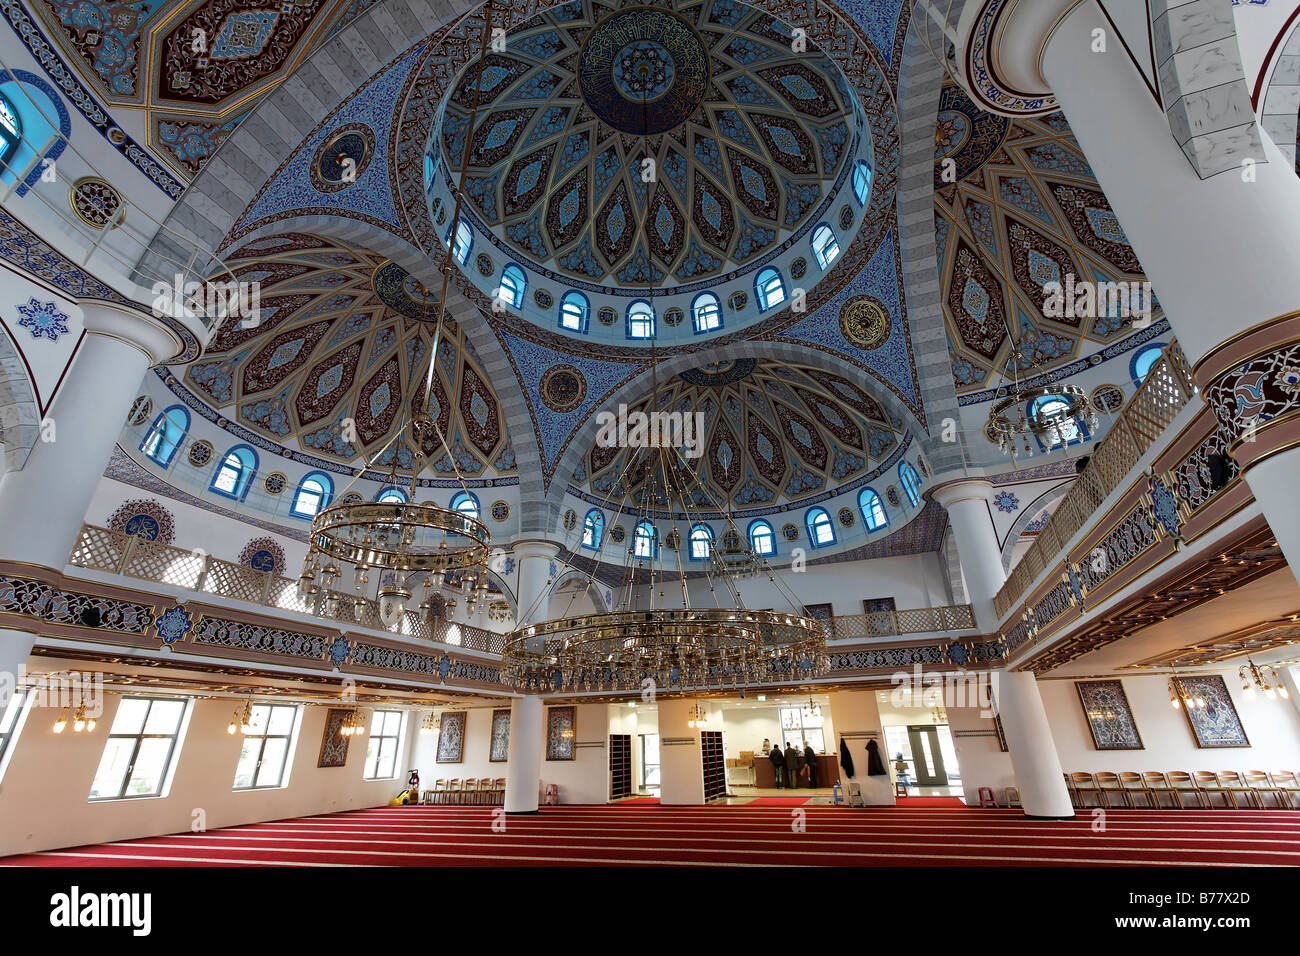 DITIB-Merkez-Mosque, interior view, newly built in the Ottoman style, one of the largest mosques in Germany, Duisburg-Marxloh,  Stock Photo